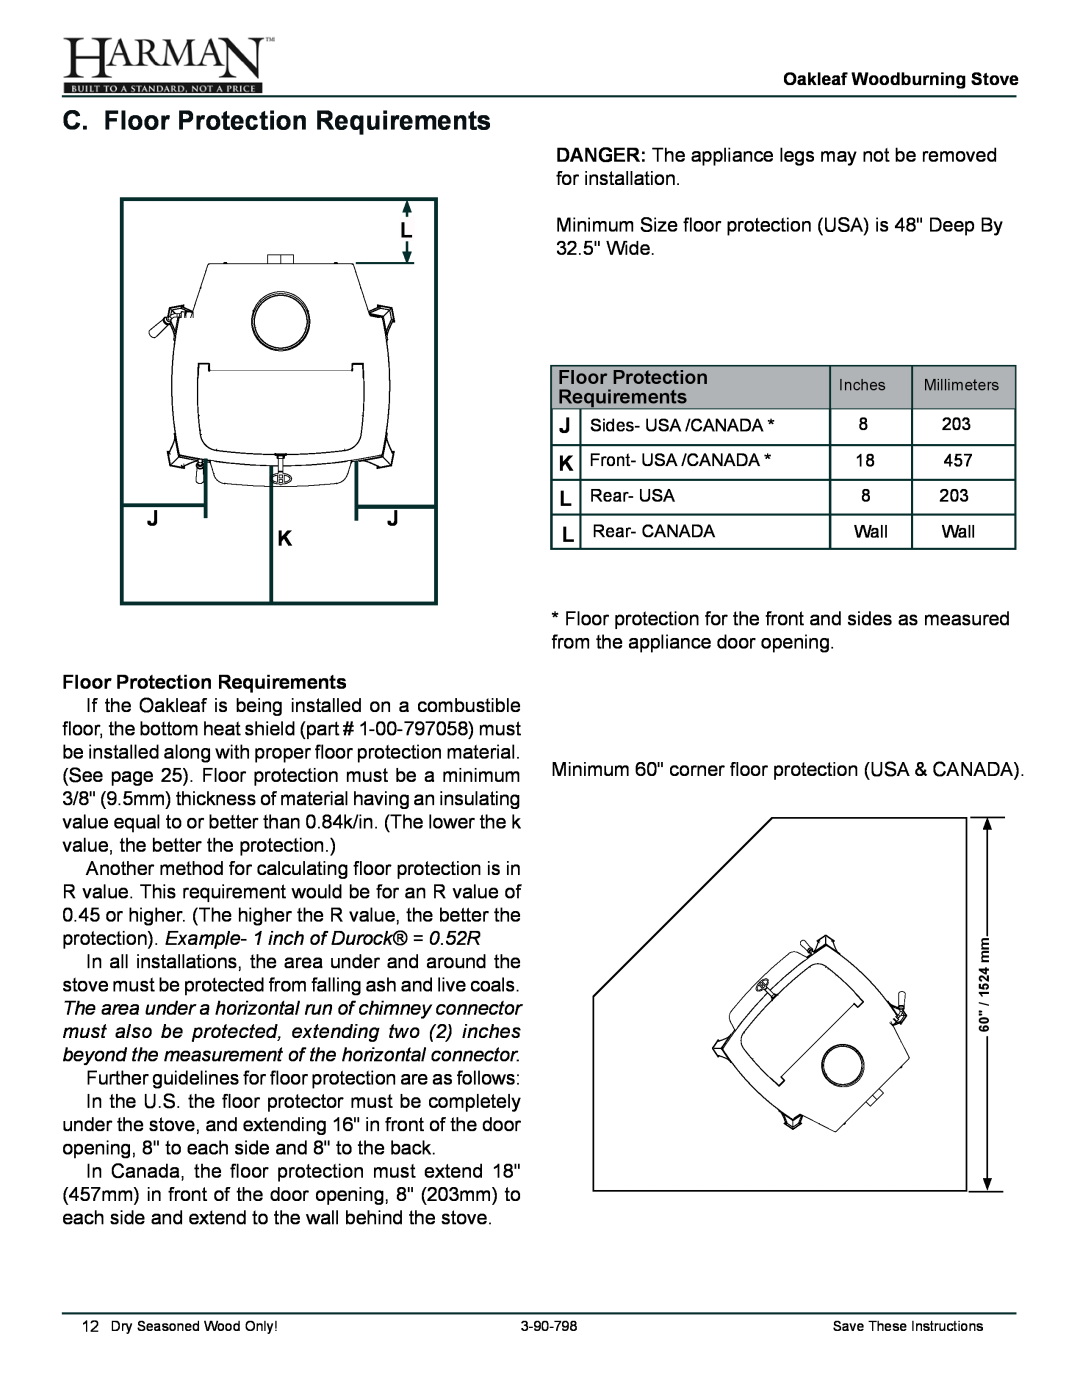 Harman Stove Company 1-90-79700 owner manual C. Floor Protection Requirements 